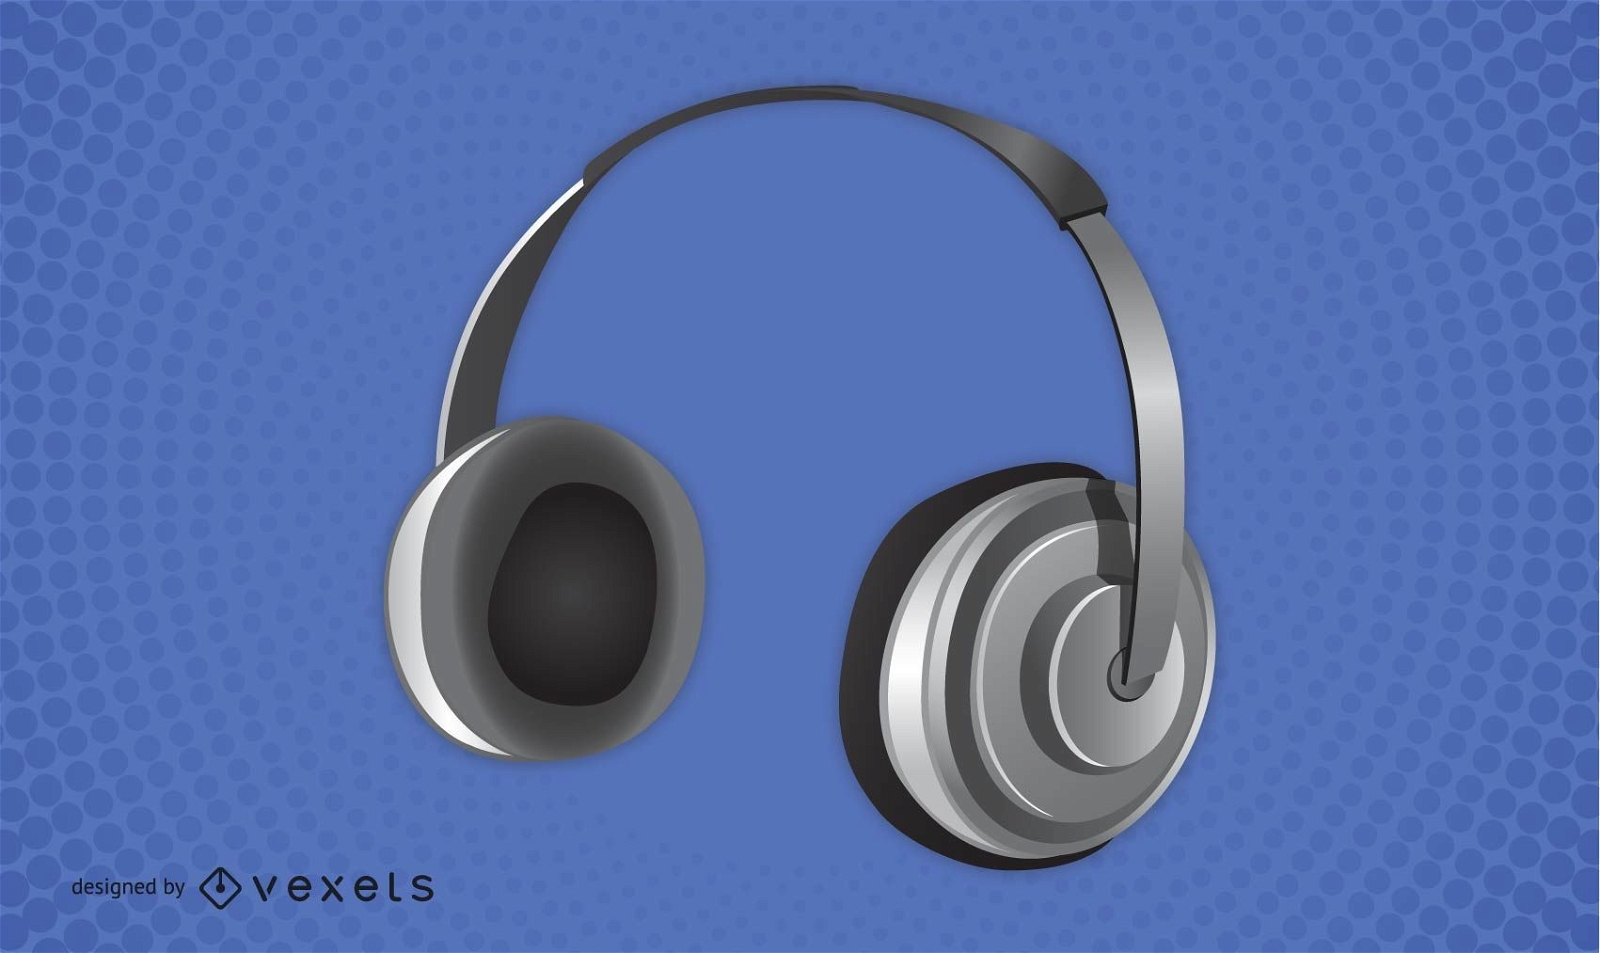 Free vector headsets